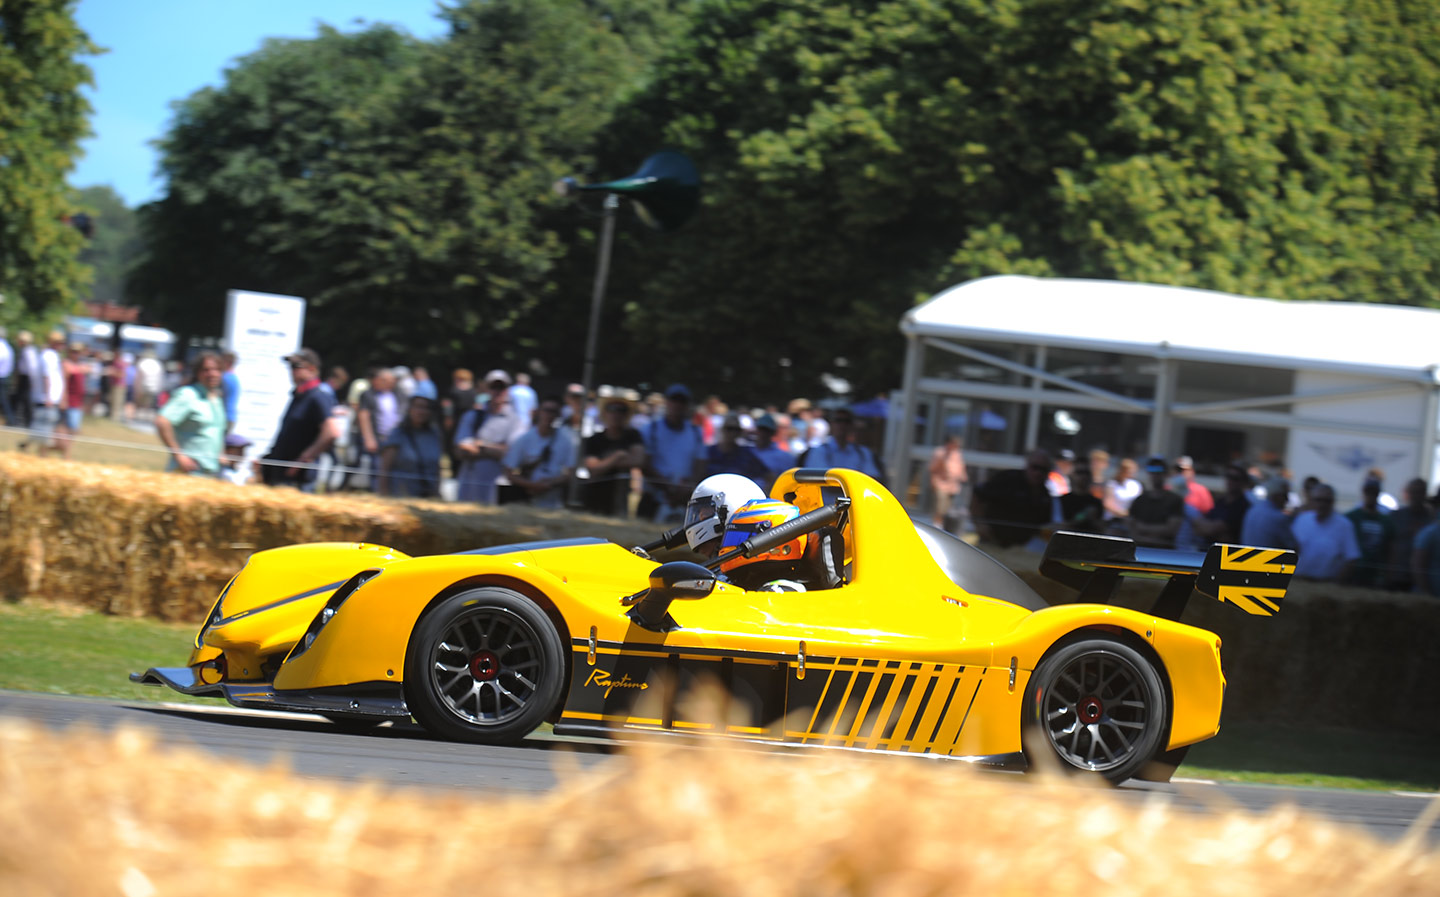 Will Dron passenger ride in Radical Rapture at Goodwood Festival of Speed